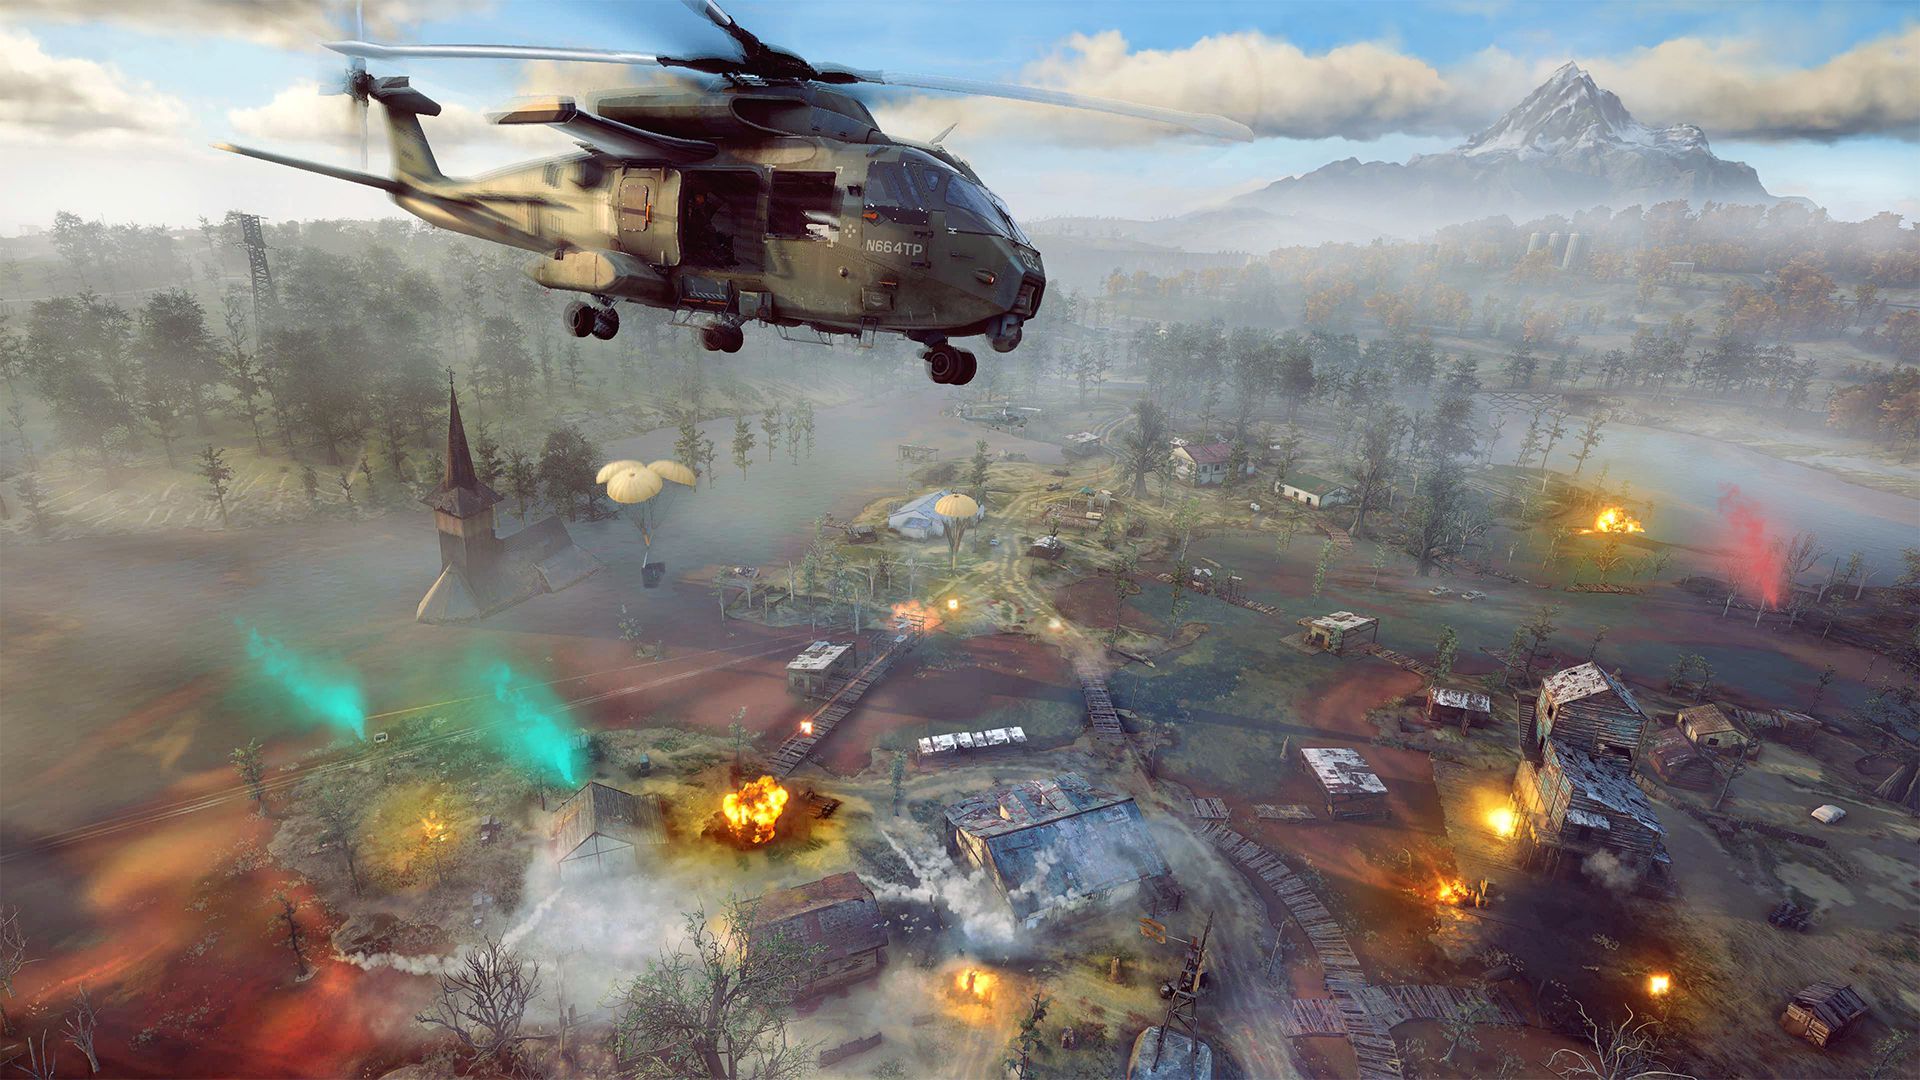 Screenshot of the game "Ghost Recon Frontline" showing an animation of a helicopter flying in the air over a battle